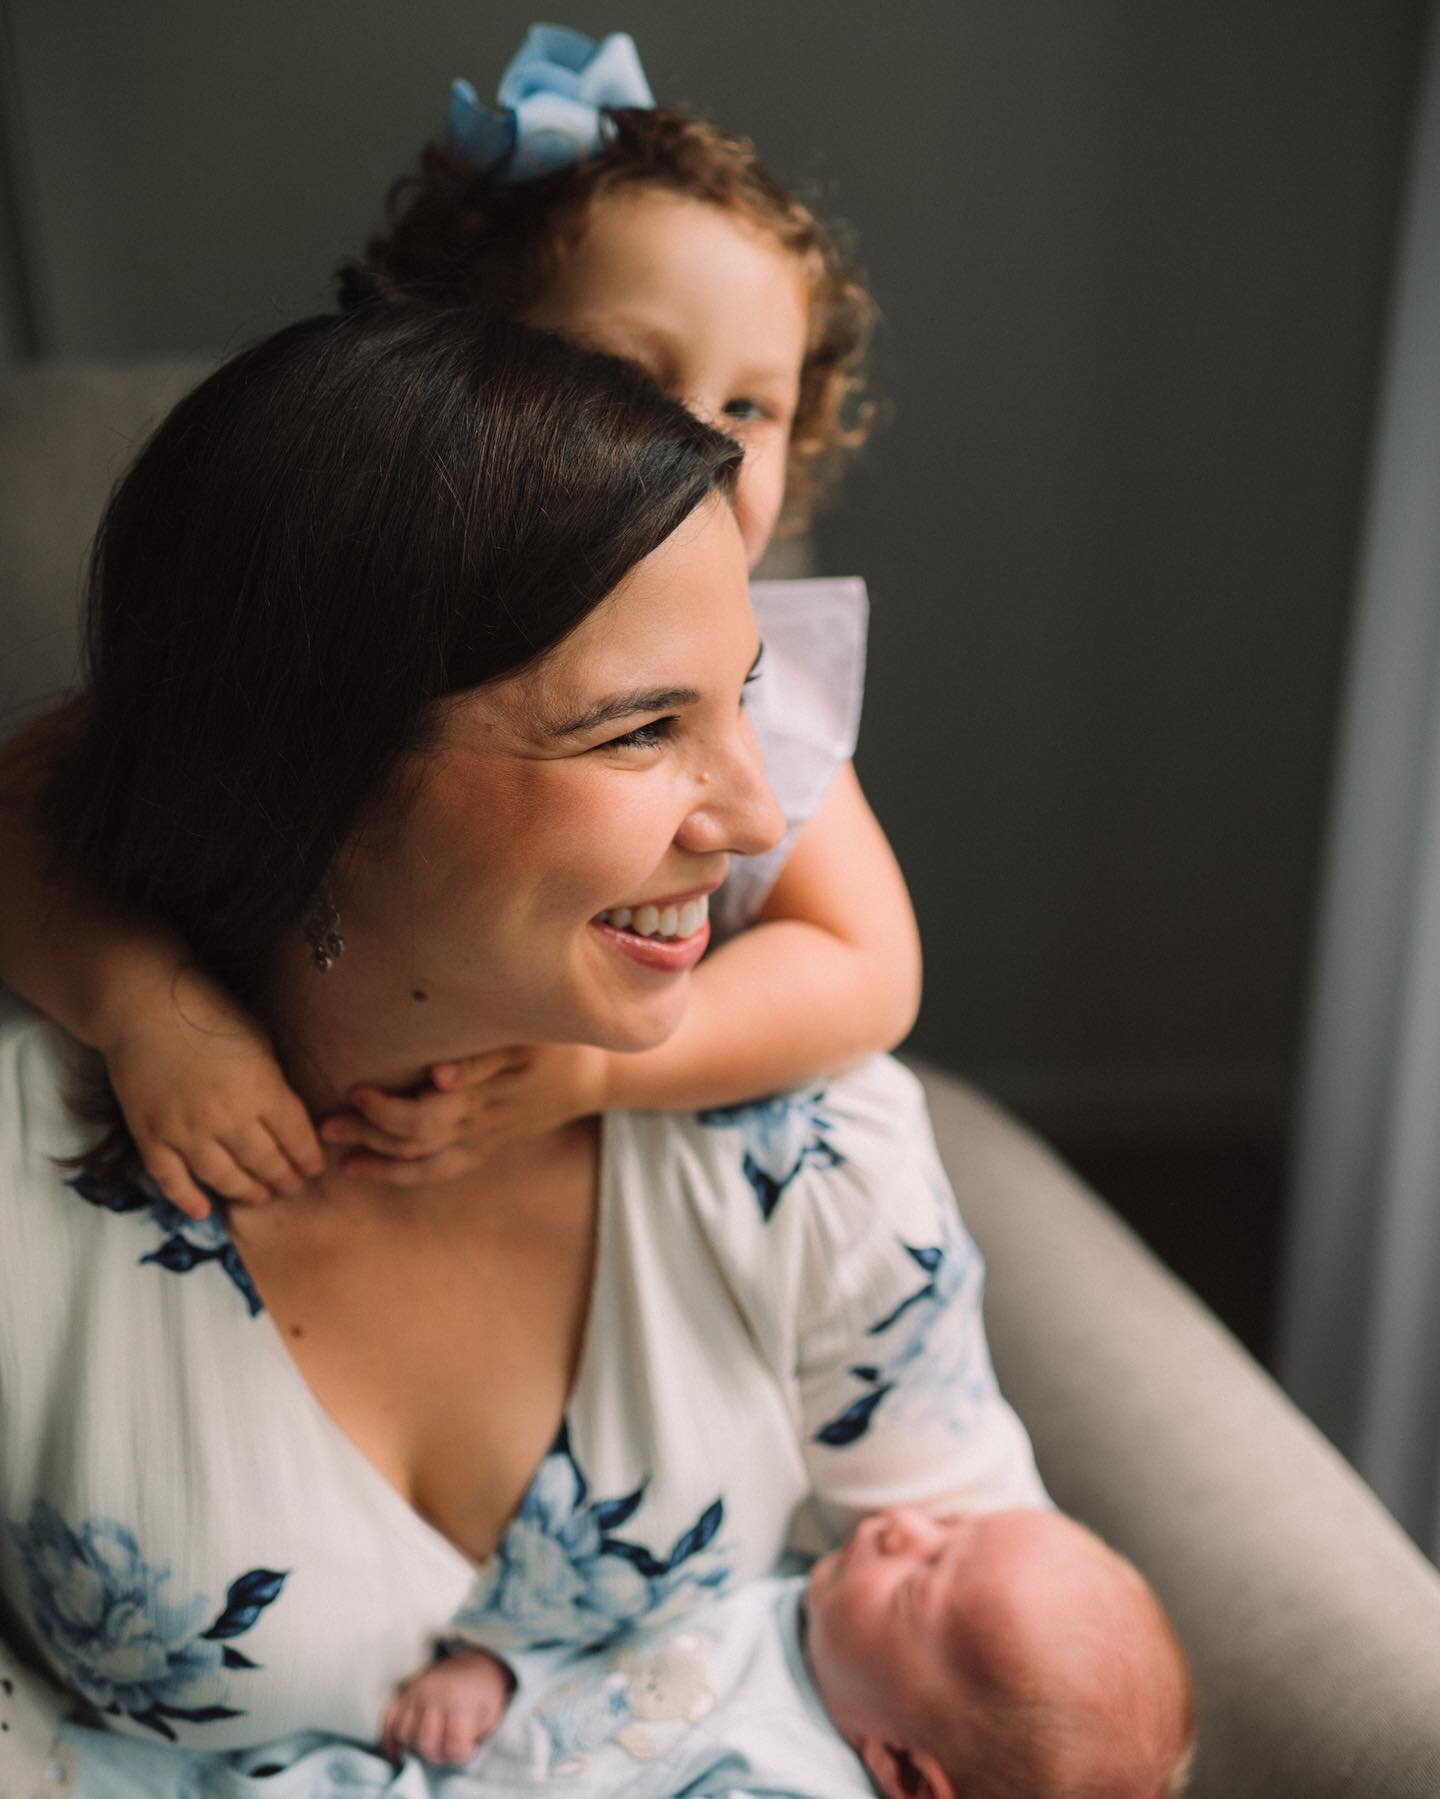 Bringing home your second baby - there&rsquo;s something so special and chaotic and wonderful about this time. For me the experience was so different from when I brought home my first. With my first, I savored all of the quiet moments rocking my baby